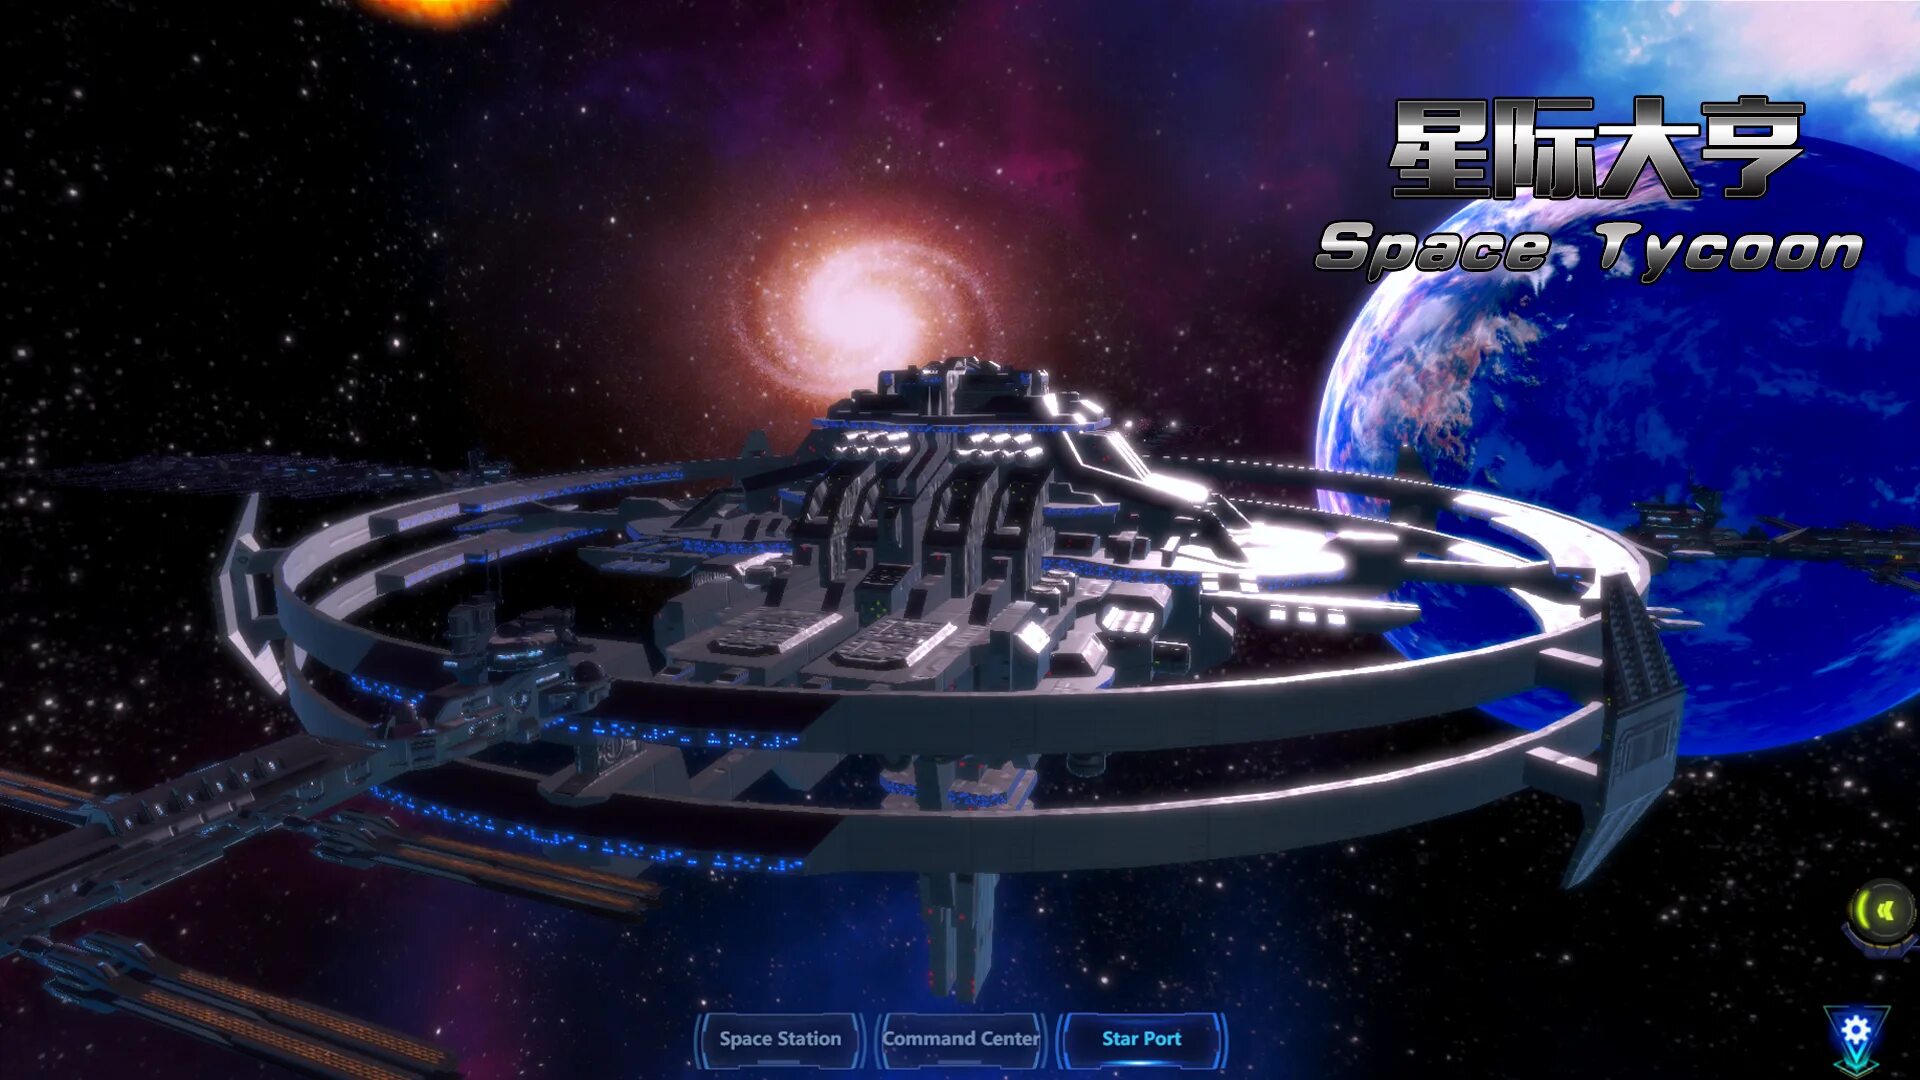 Space station tycoon. Мод на космос. Outer Space игра. Space Station Tycoon 2000.